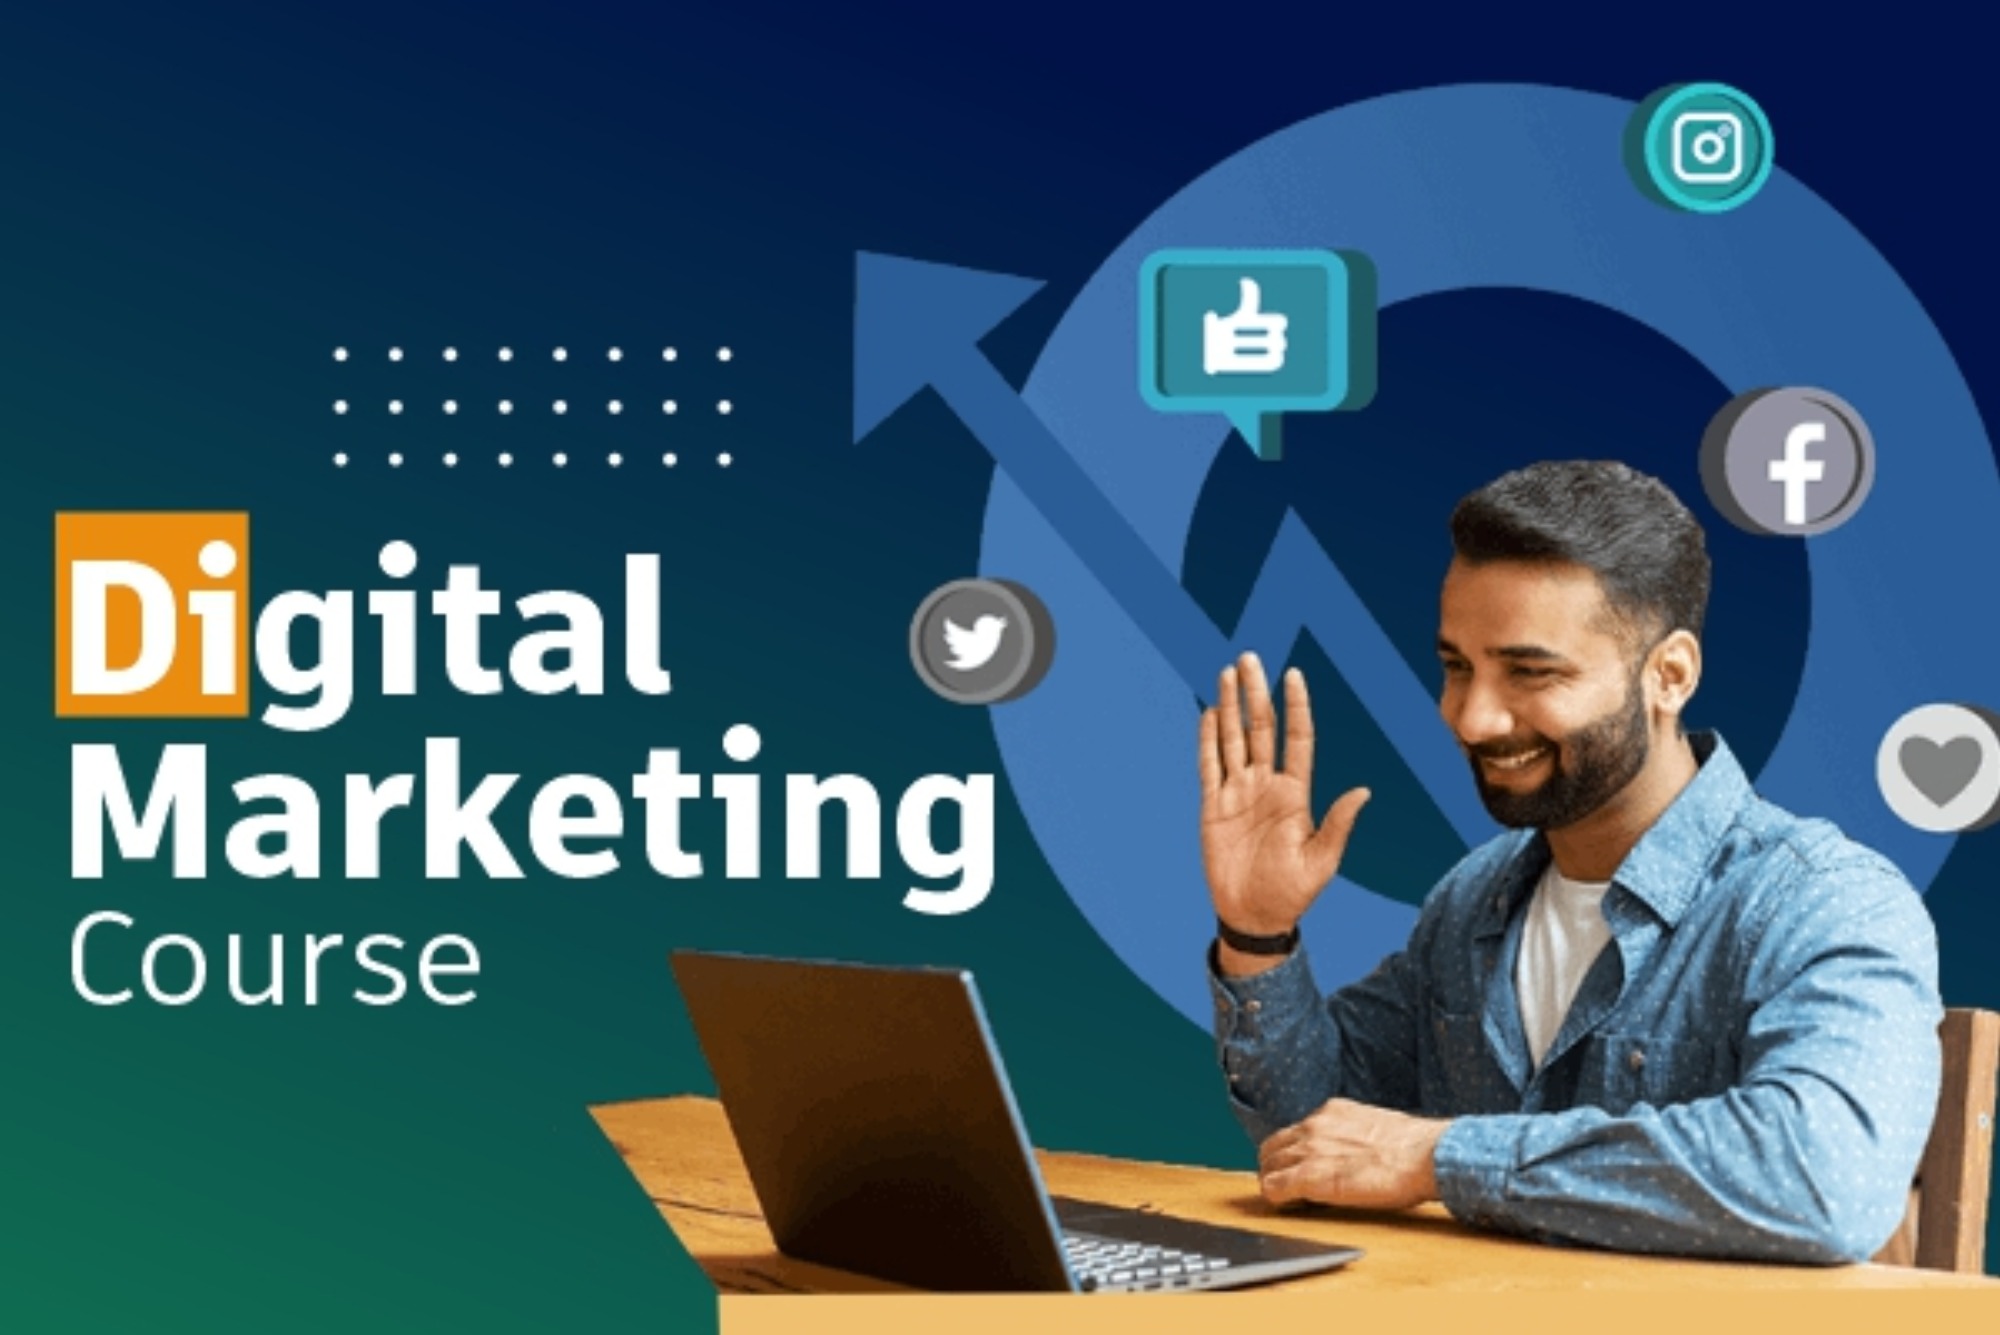 What We Learn in a Digital Marketing Course